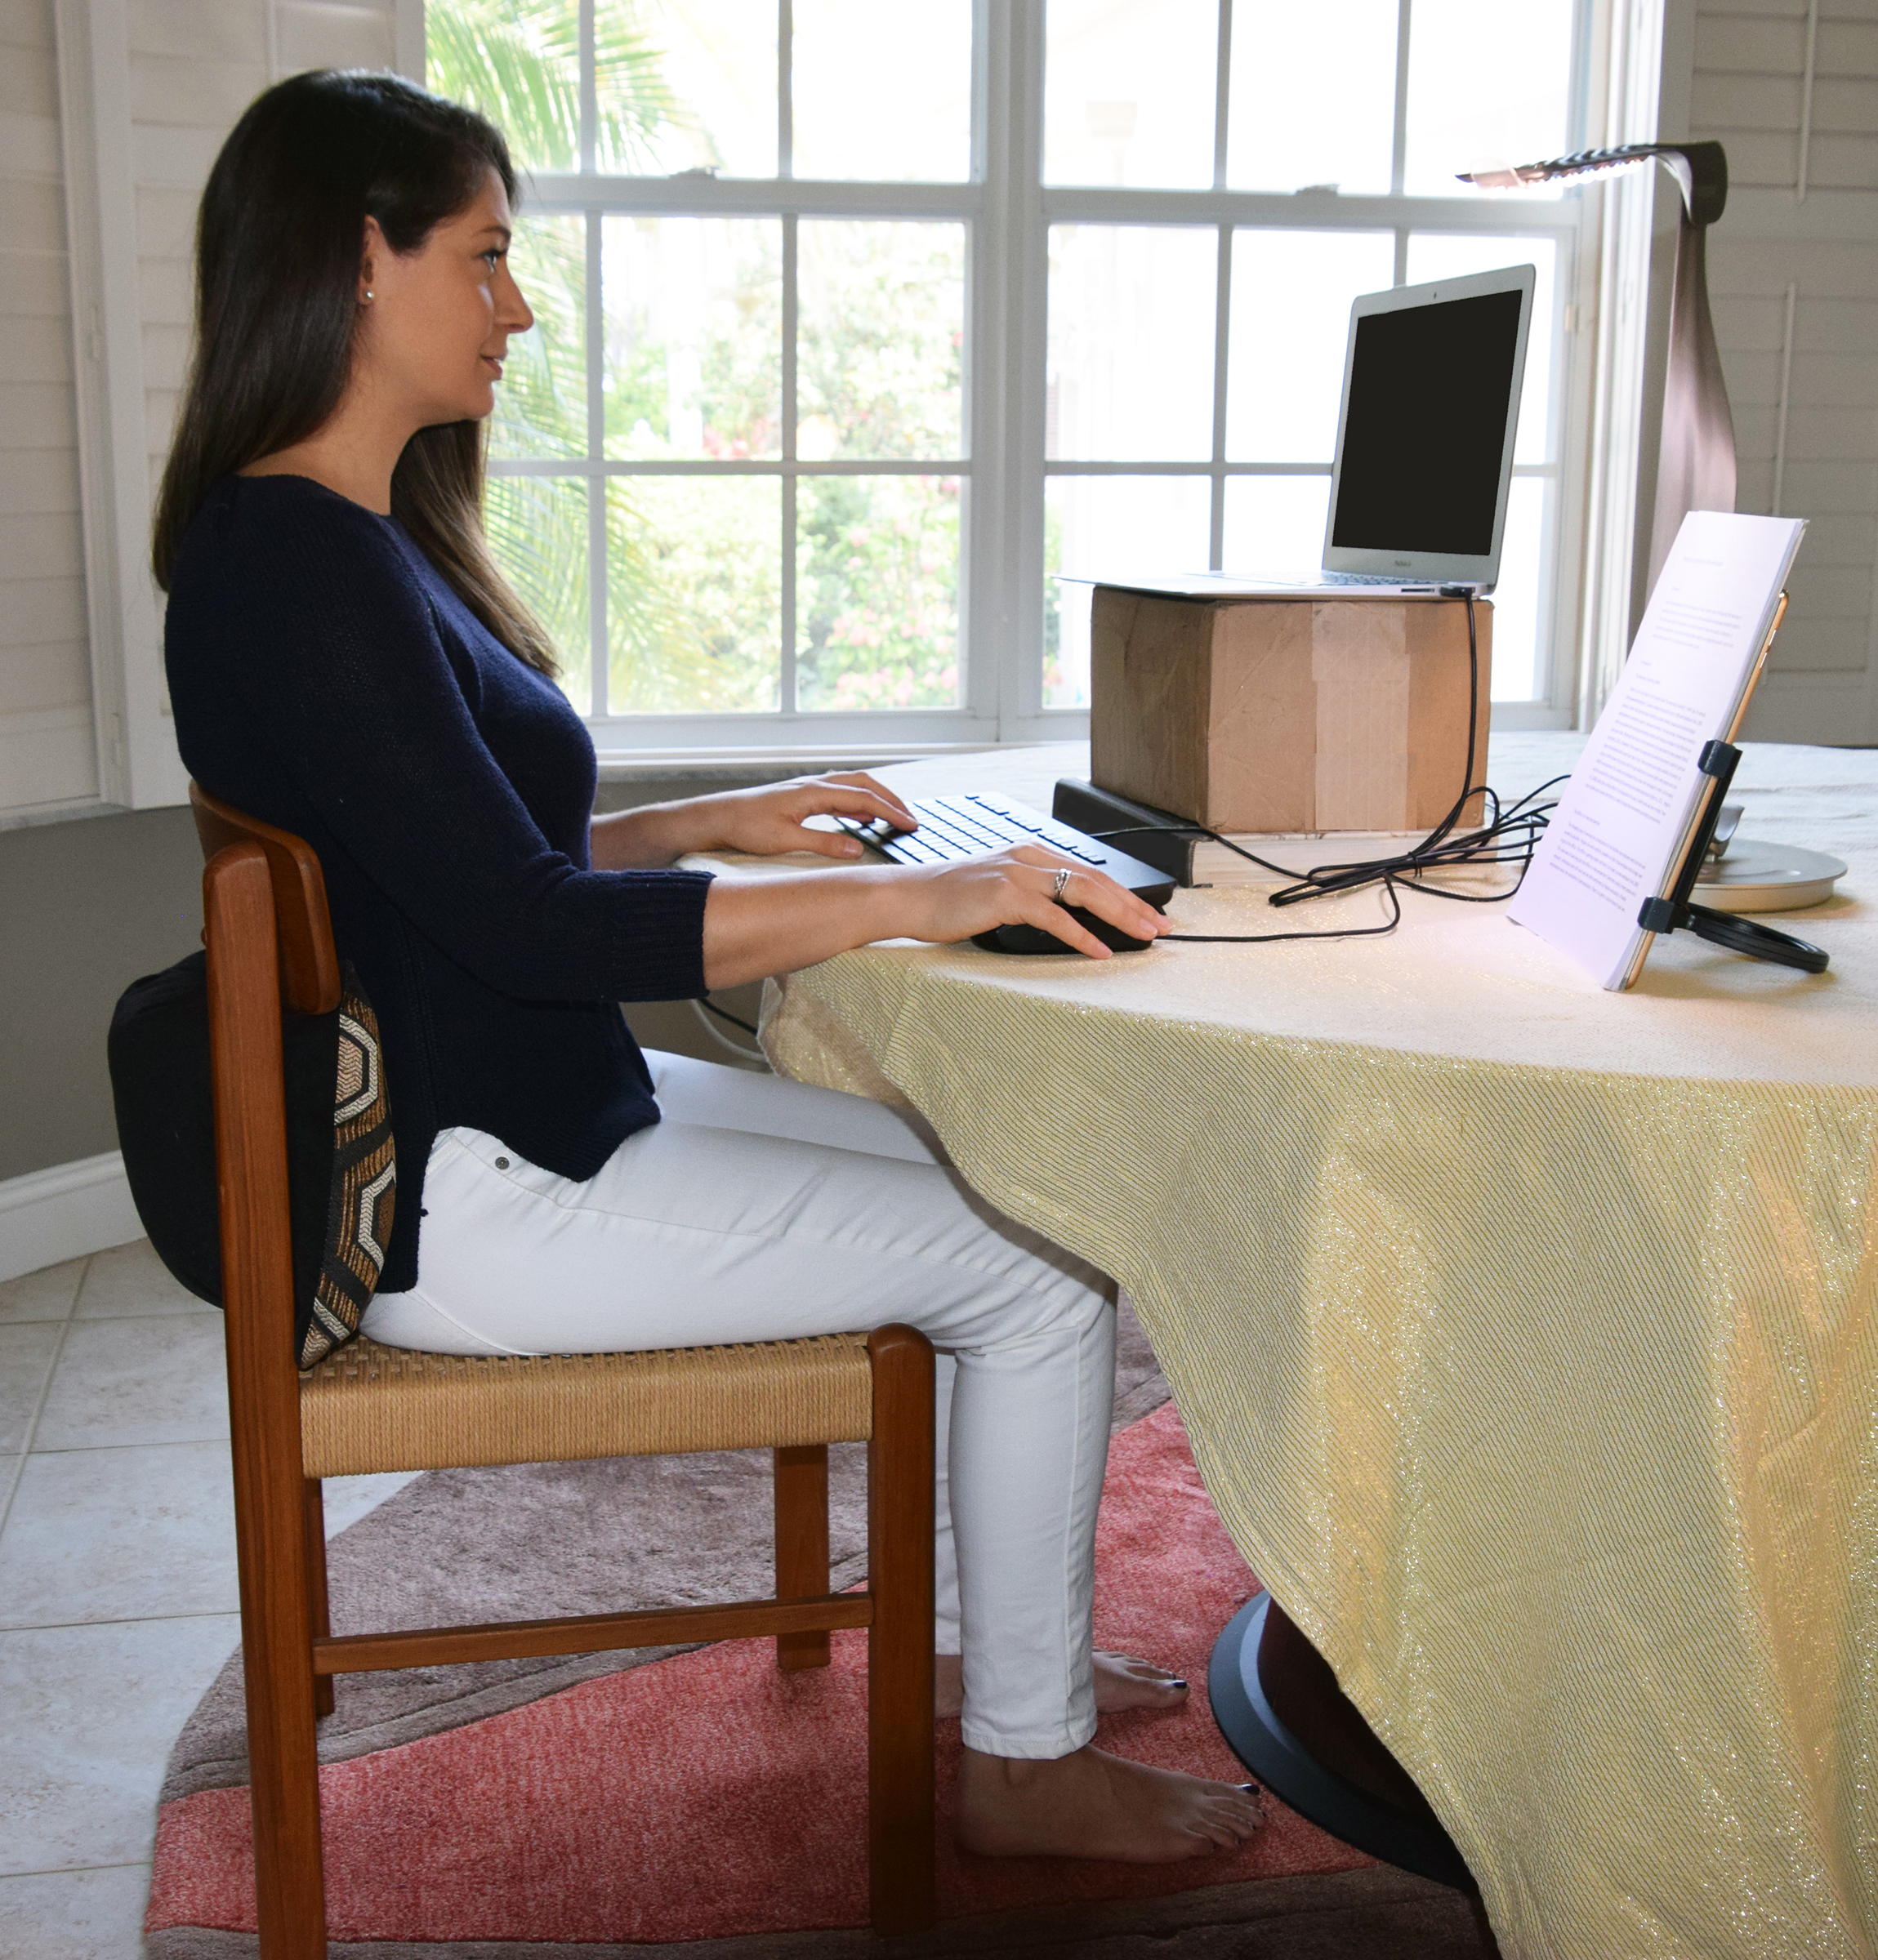 The author's daughter-in-law demonstrates optimal ergonomic posture. (Courtesy of Alan Hedge)